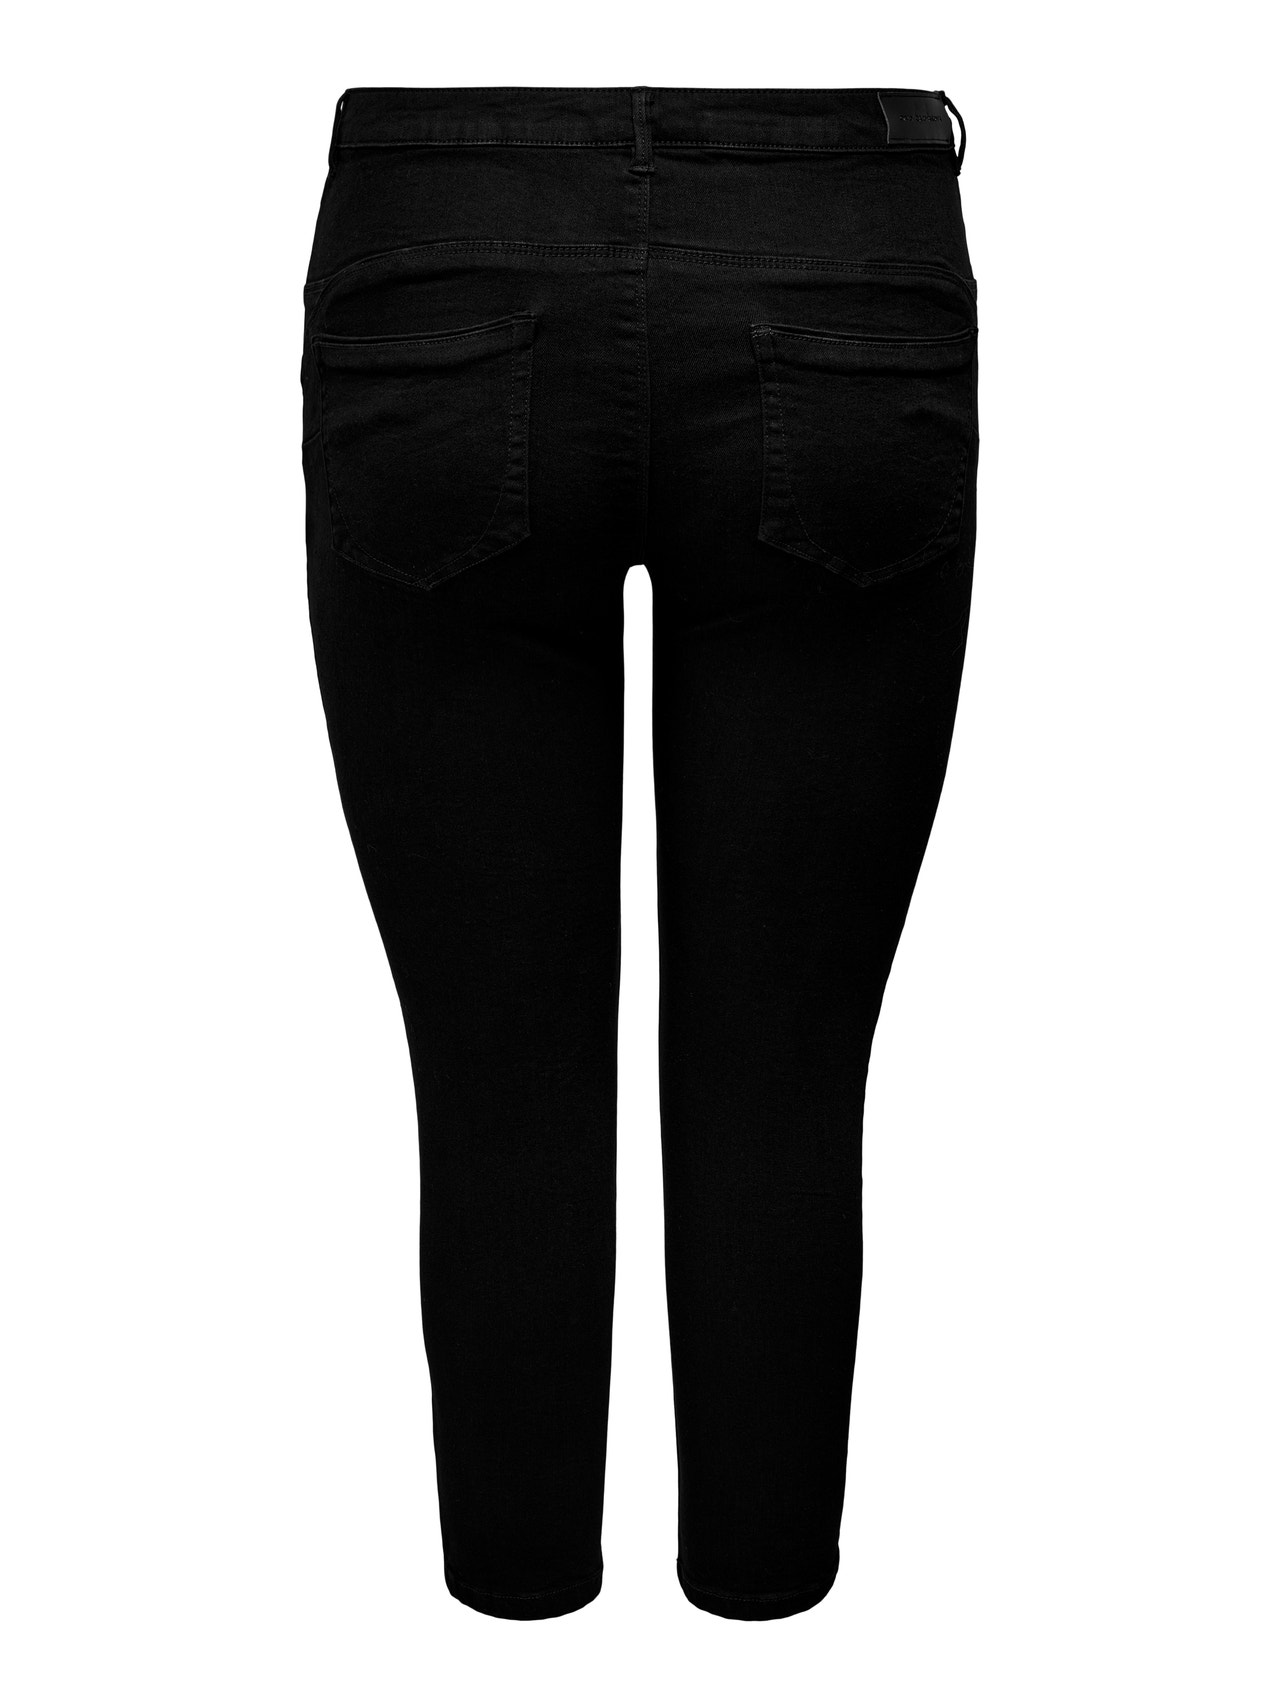 ONLY CARAnte Life regular, con efecto push up Jeans skinny fit -Black - 15287098